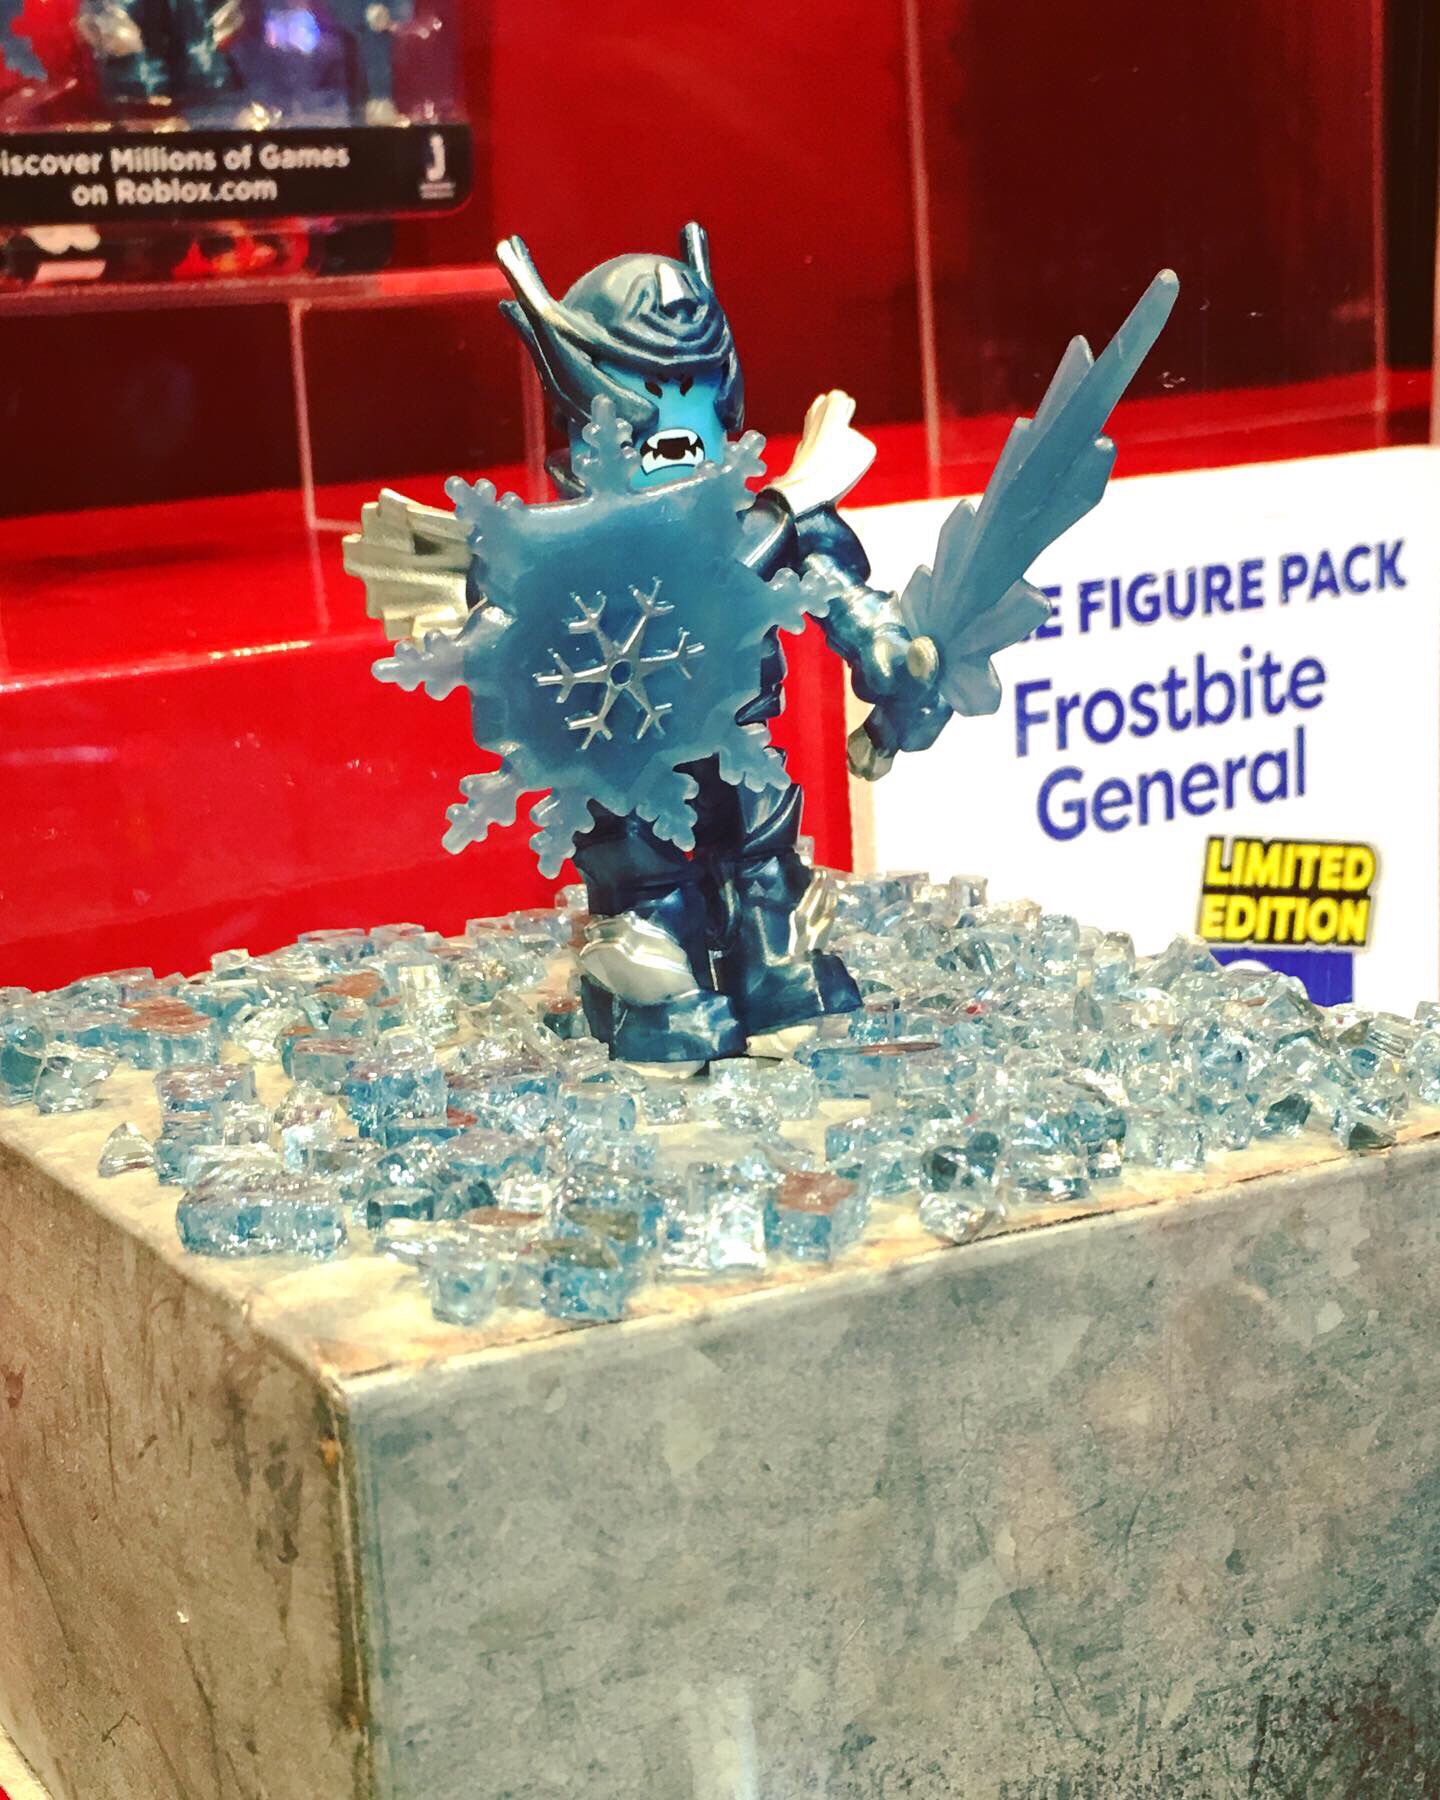 Roblox Frostbite General For Sale In San Diego Ca Offerup - frostbite general roblox code